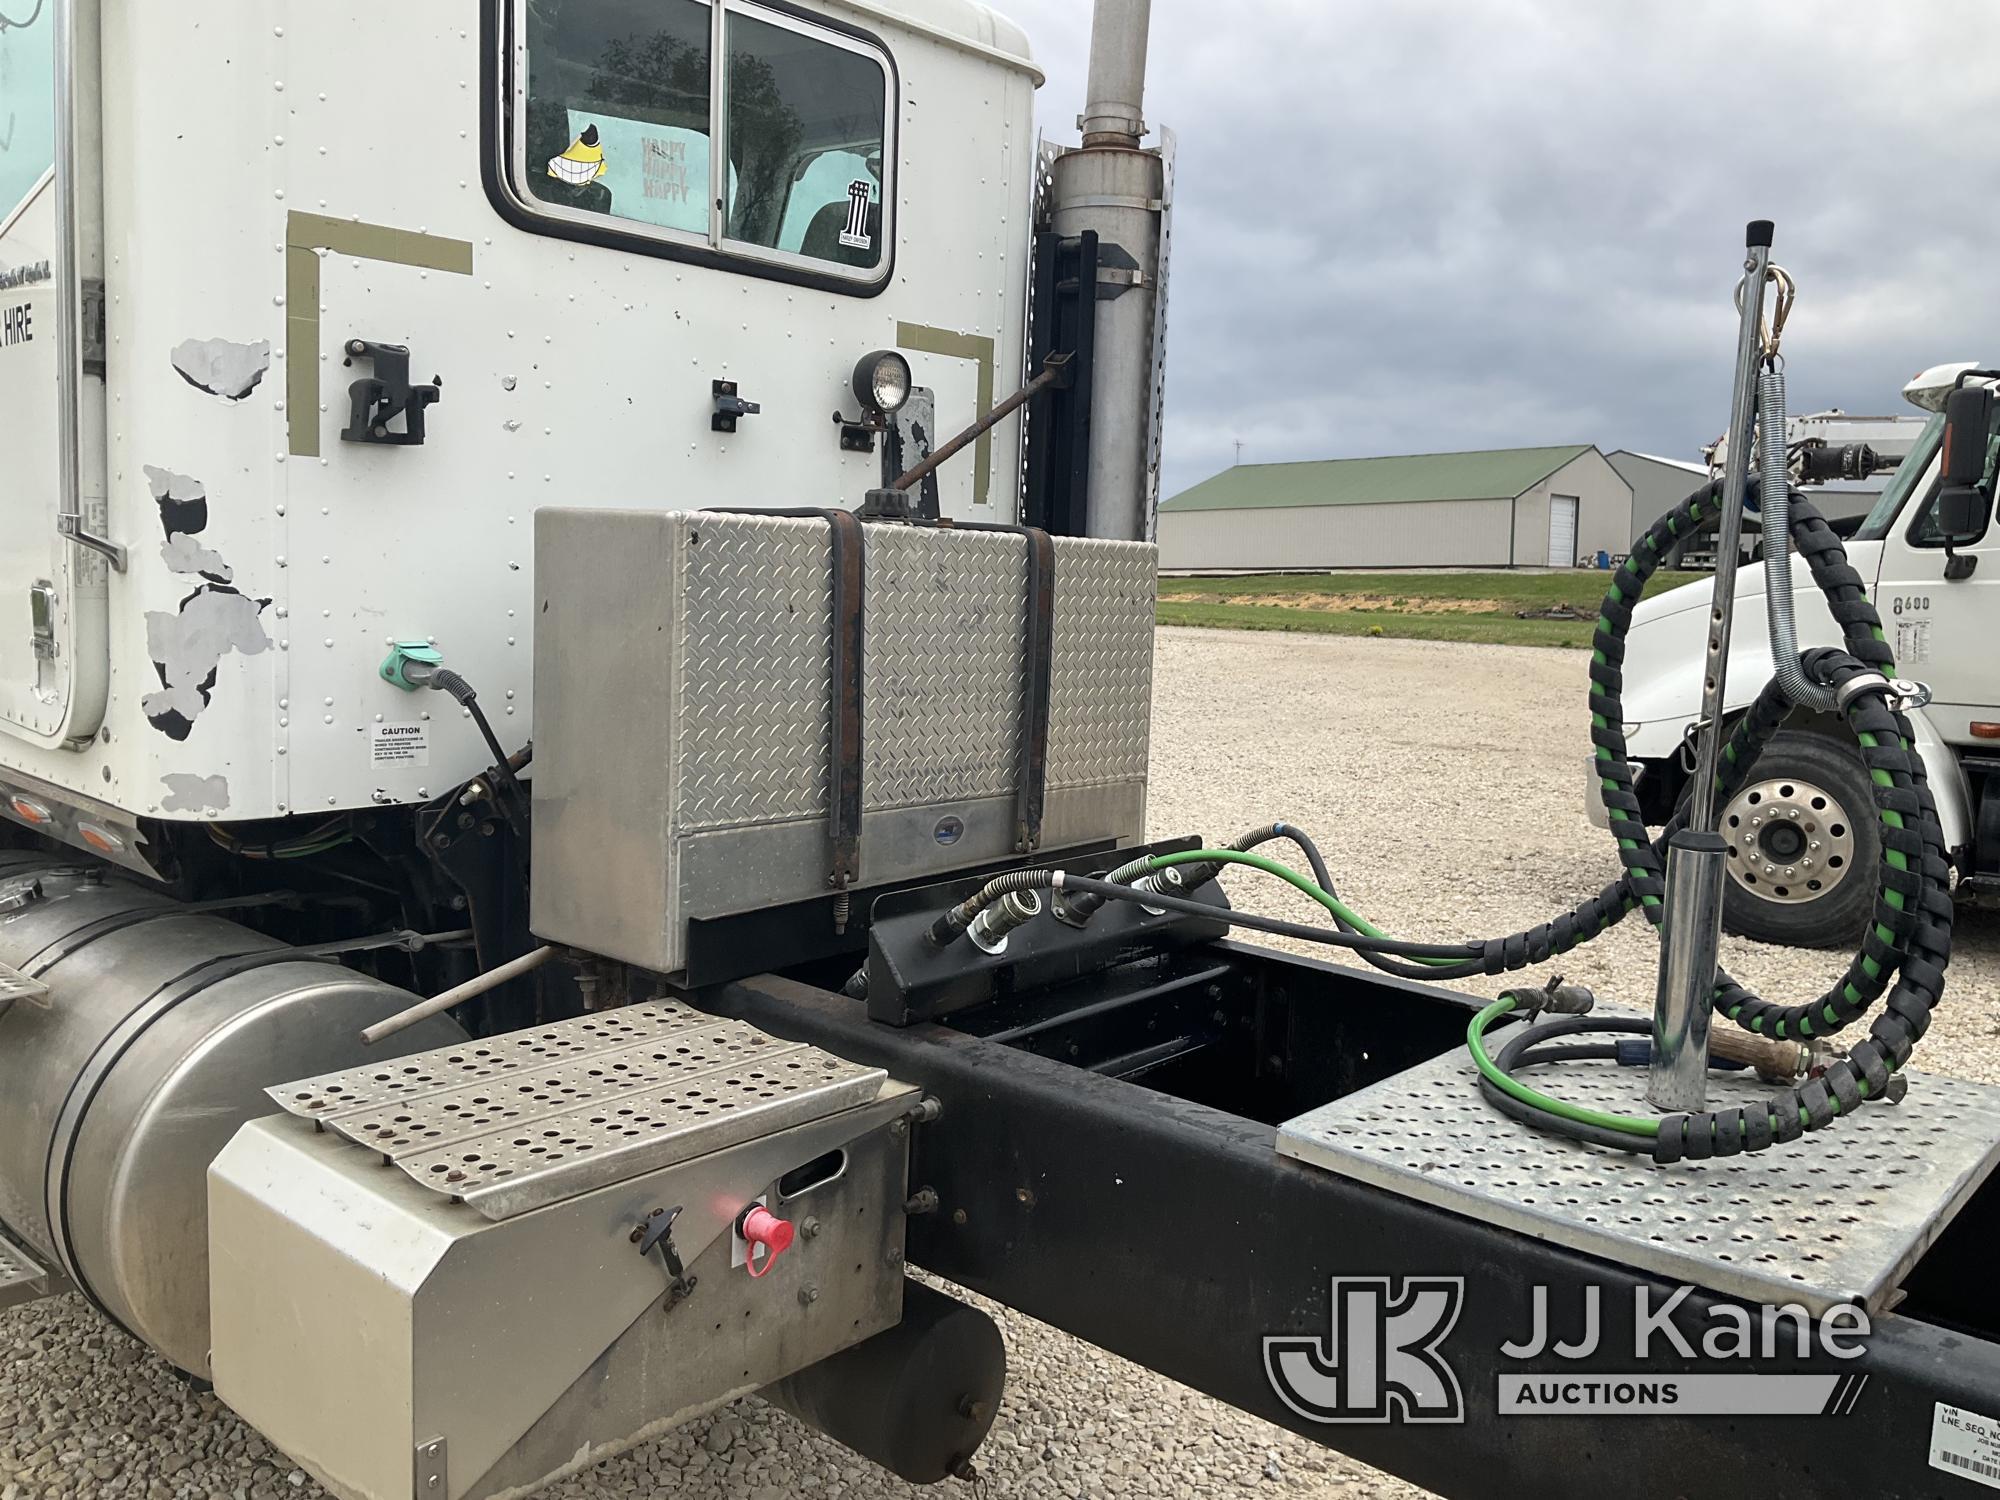 (Tipton, MO) 2007 International 5900i T/A Truck Tractor Runs and Moves) (Check Engine Light On